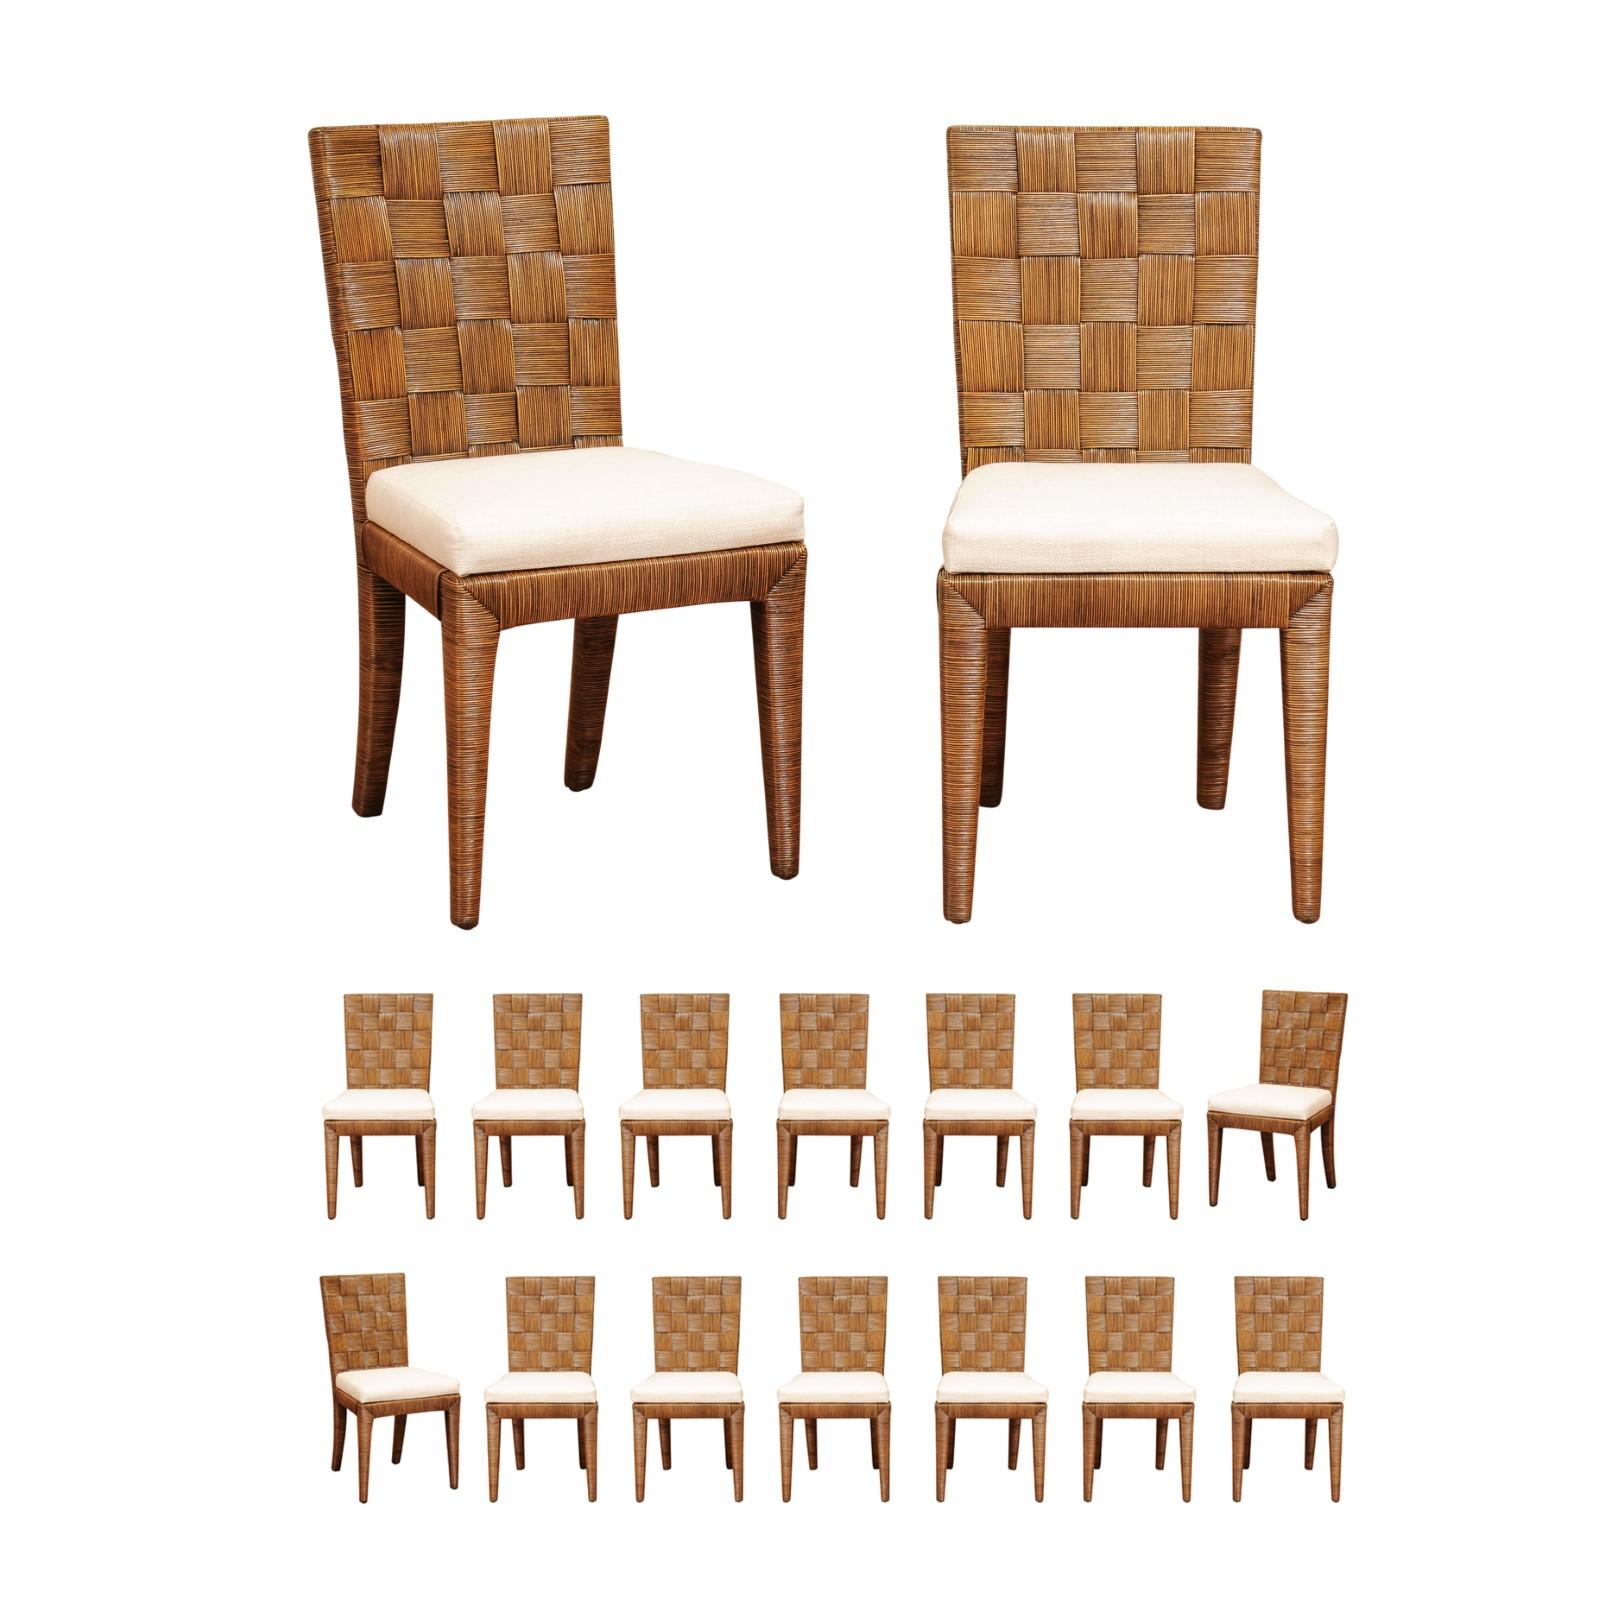 Incredible Set of 16 Vintage Tobacco Cane Chairs by John Hutton for Donghia For Sale 13